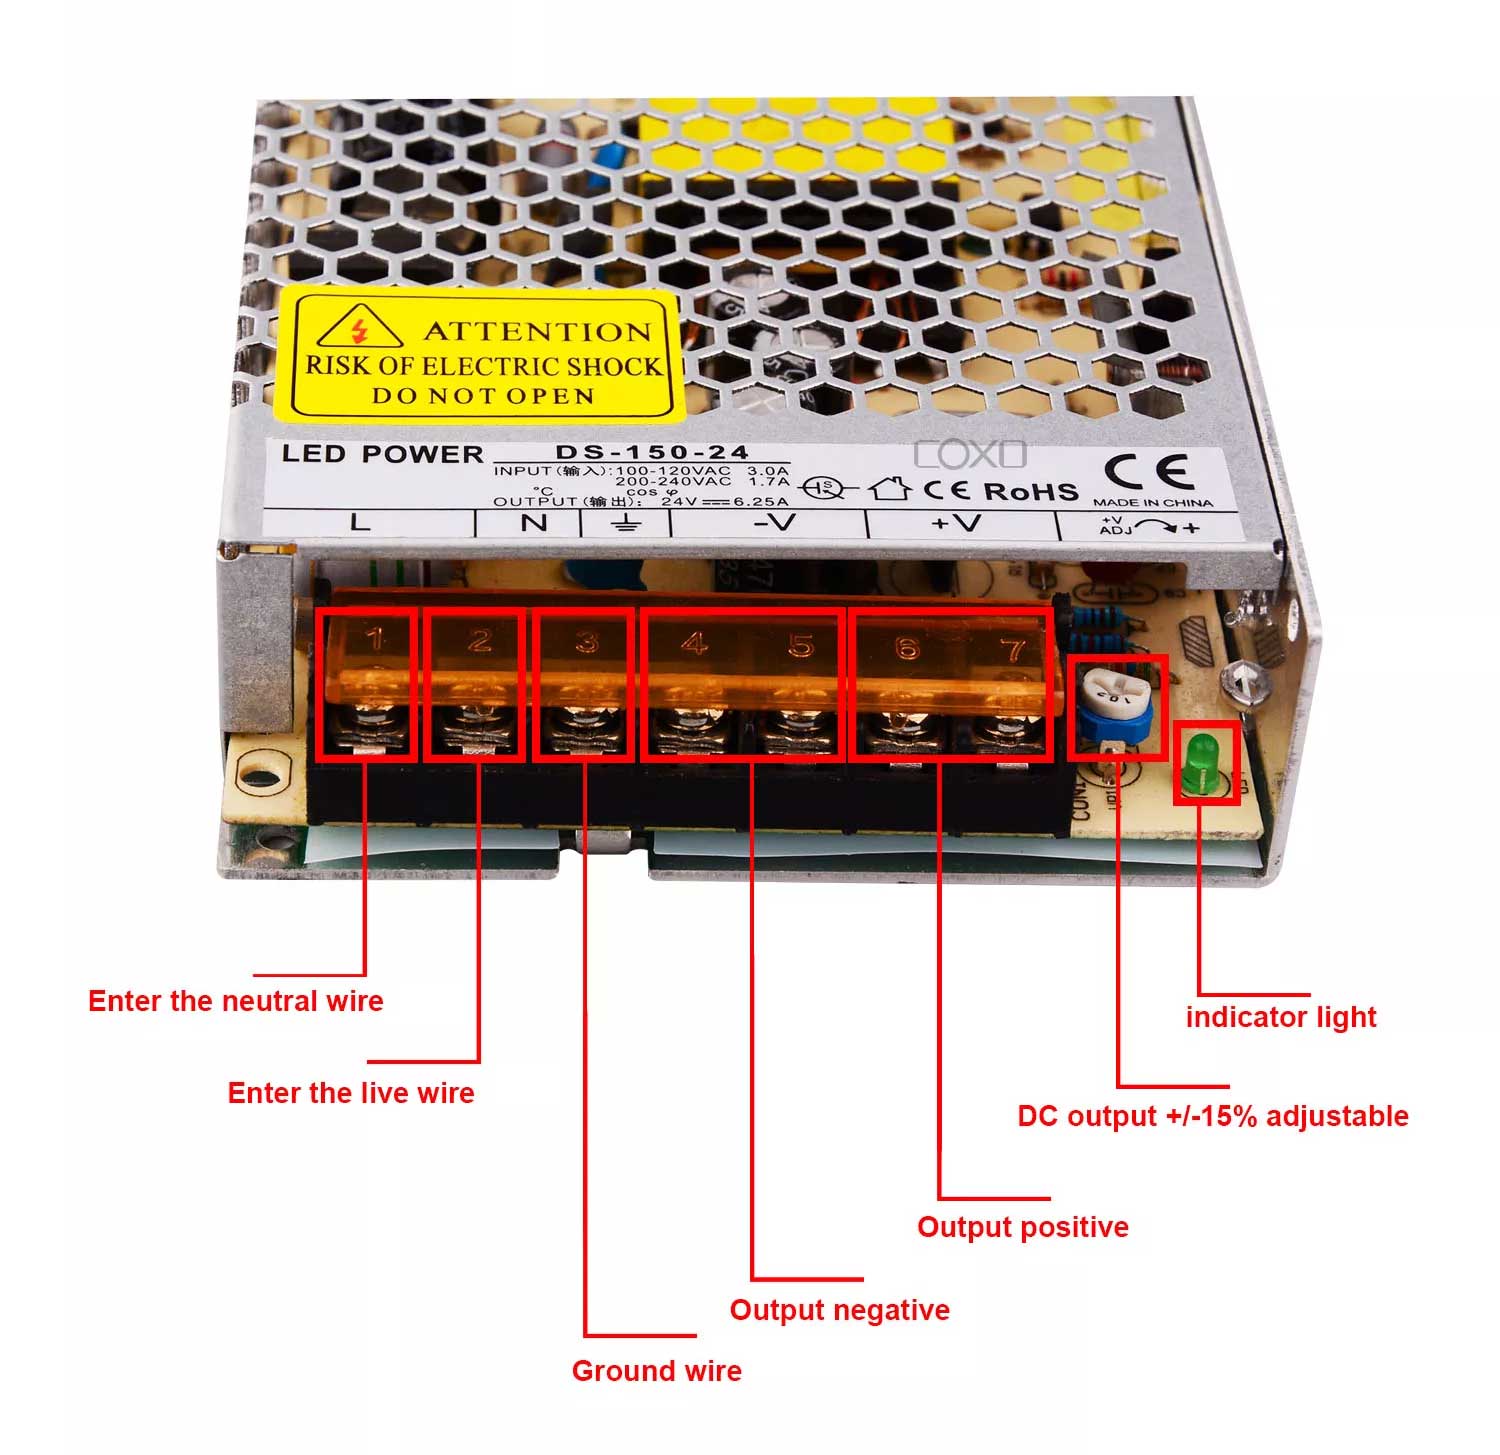 This picture details the usage of switch power supply and the functions of various interfaces